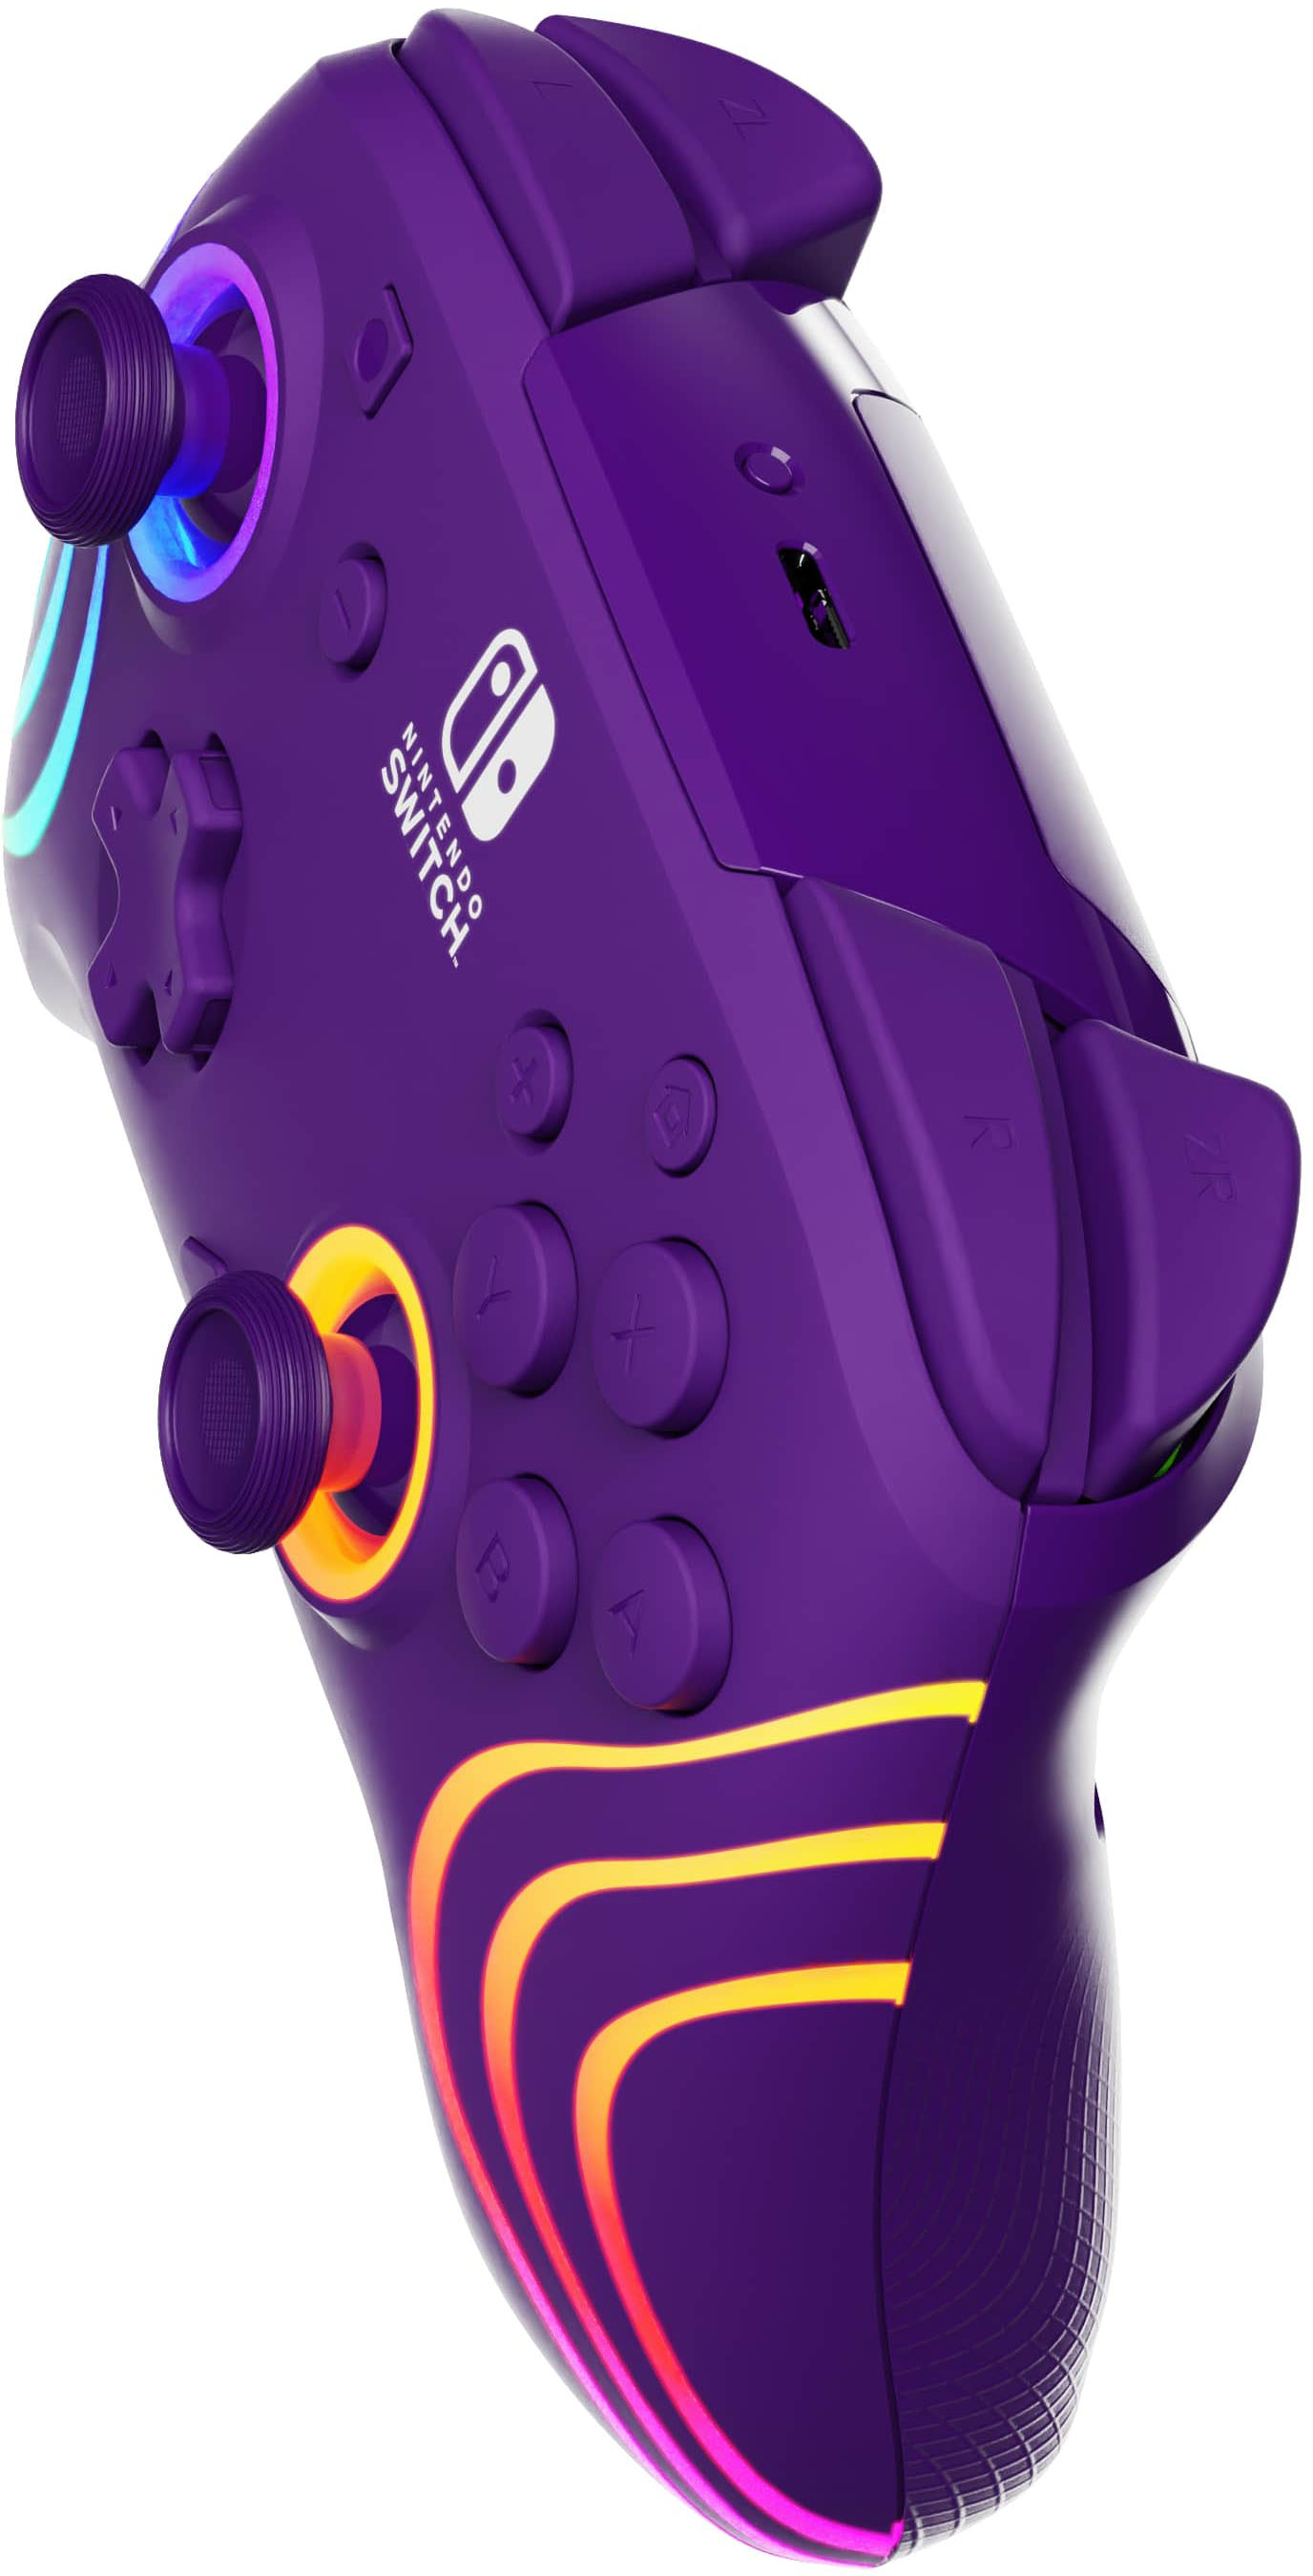 PDP Afterglow™ Wave Wireless LED Controller for Nintendo Switch, Nintendo  Switch/OLED - Purple